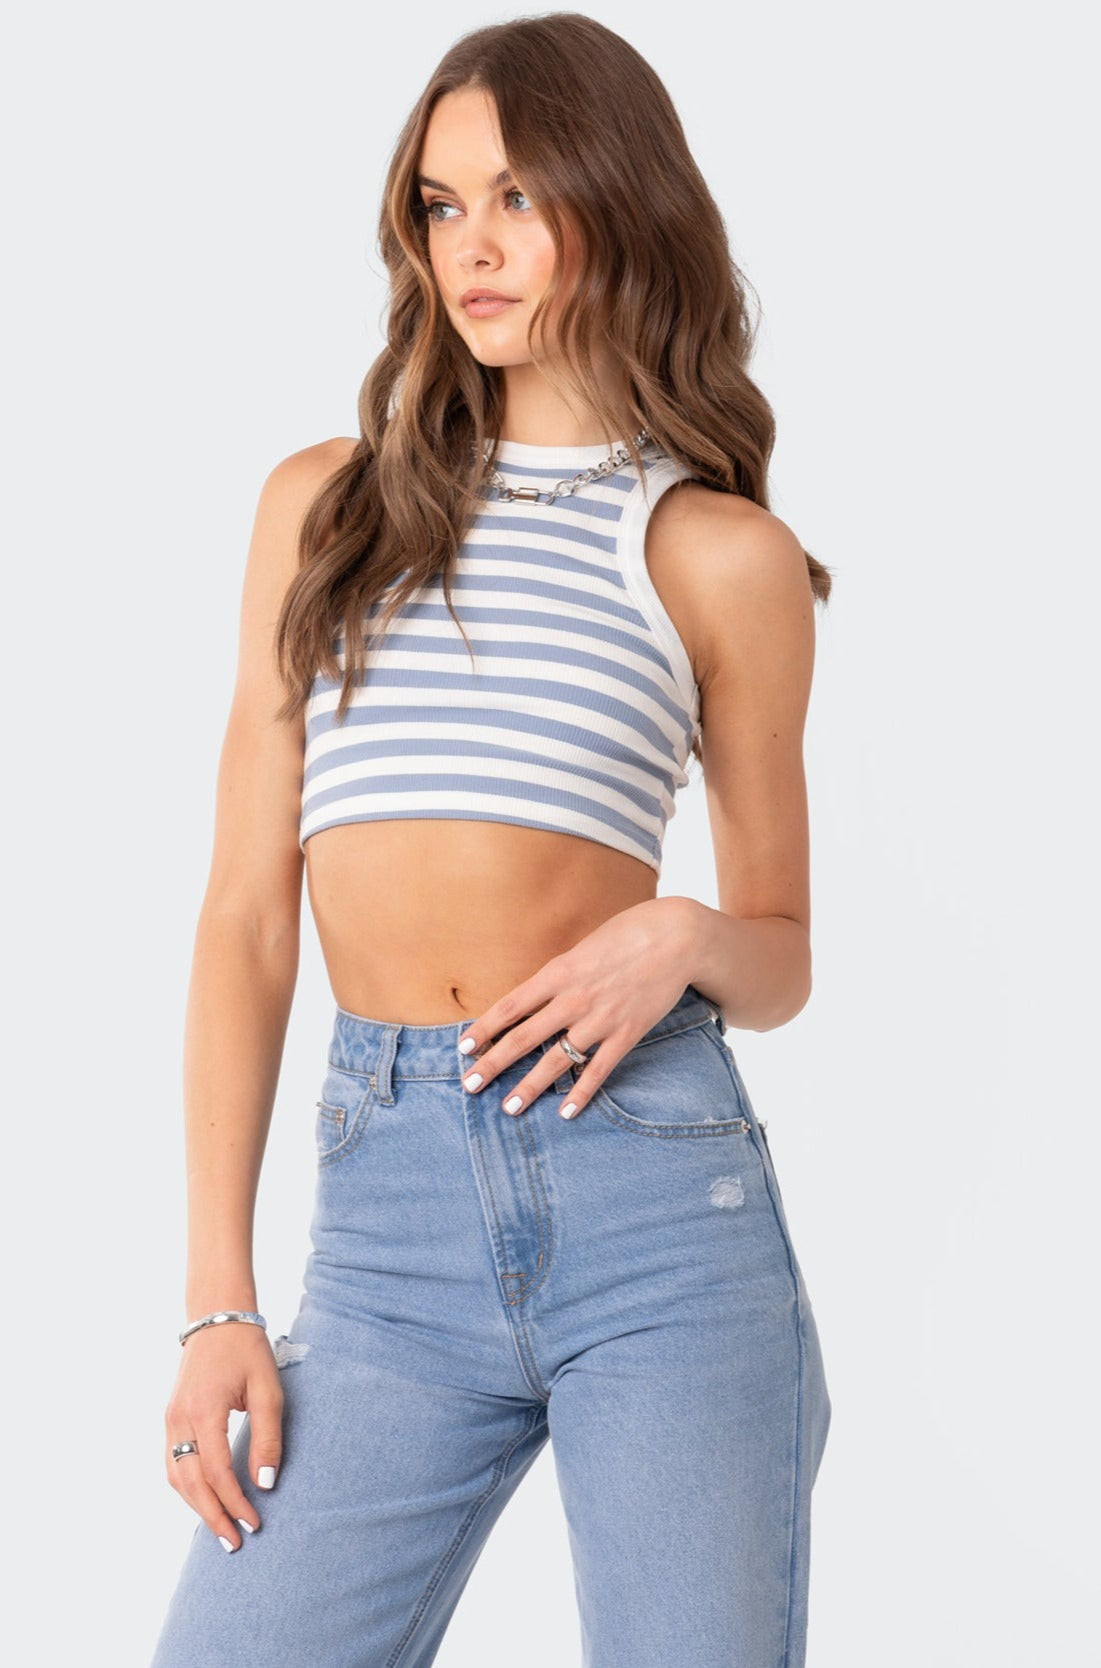 Racer Back Cropped Tank Top